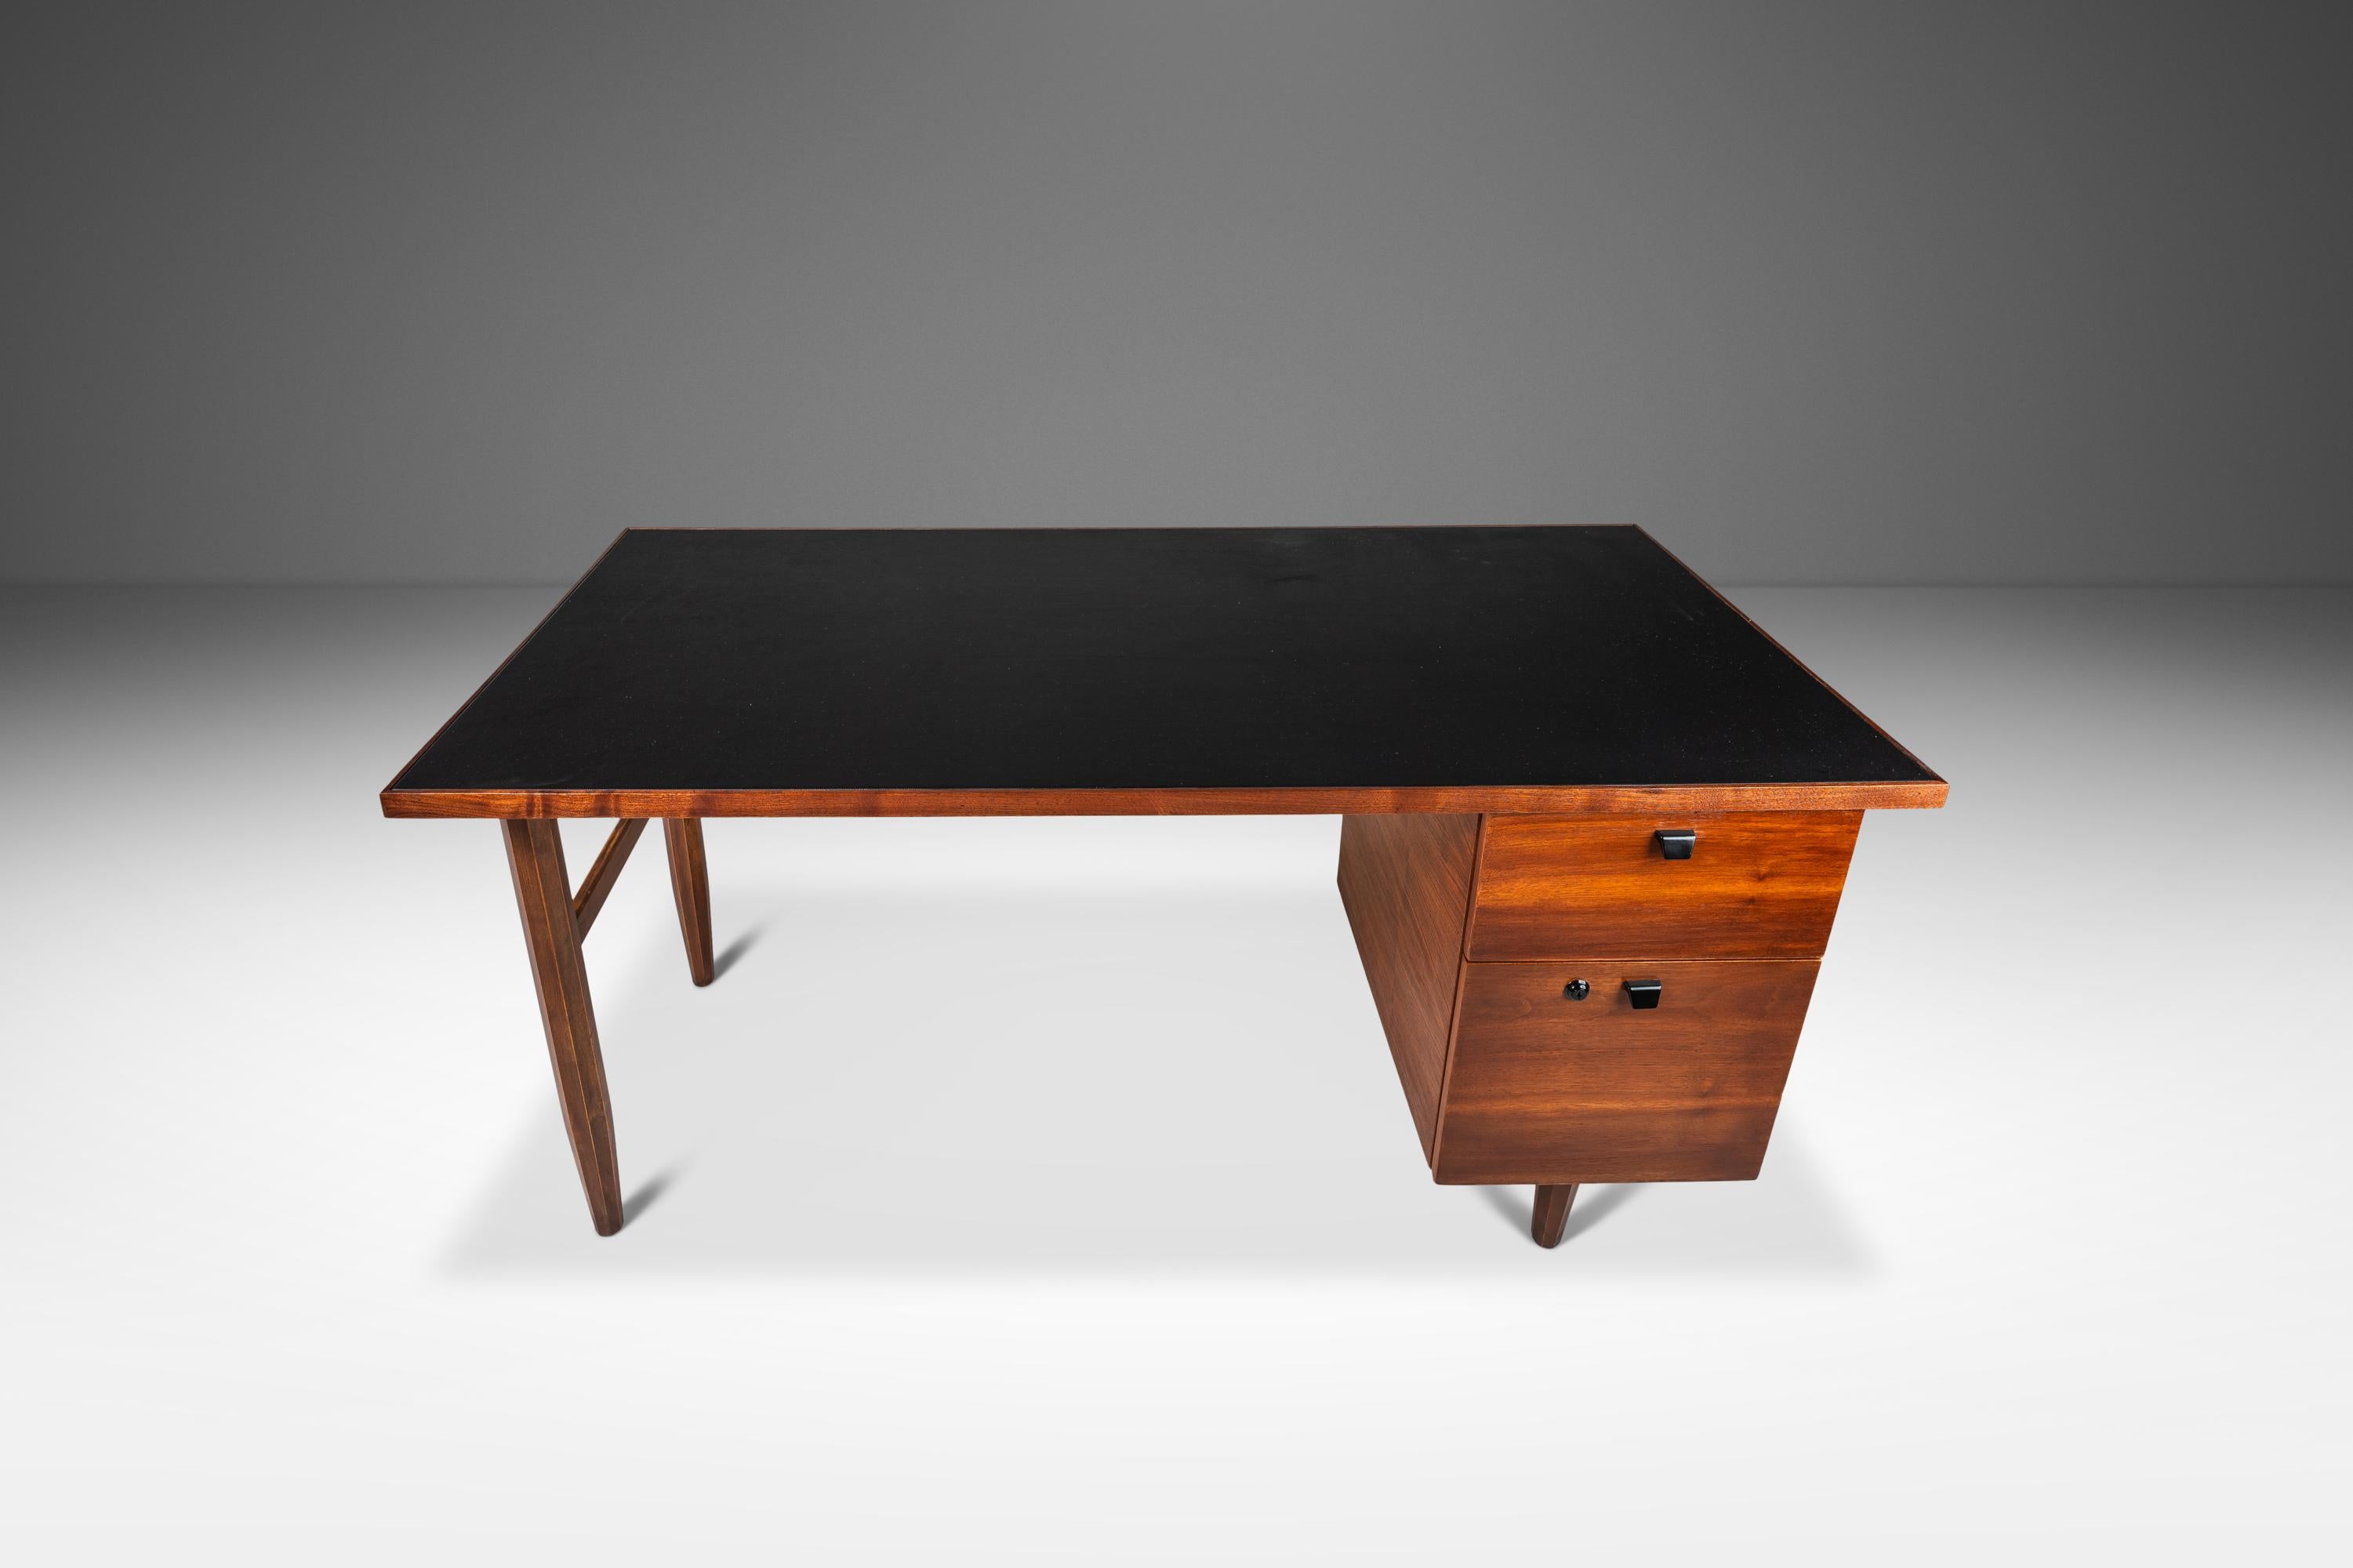  Introducing an extraordinary writer's desk fresh out of our restoration shop. Originally built in the 1960's this minimalist desk has undergone a comprehensive and transformative restoration process that features a genuine leather desk top as well